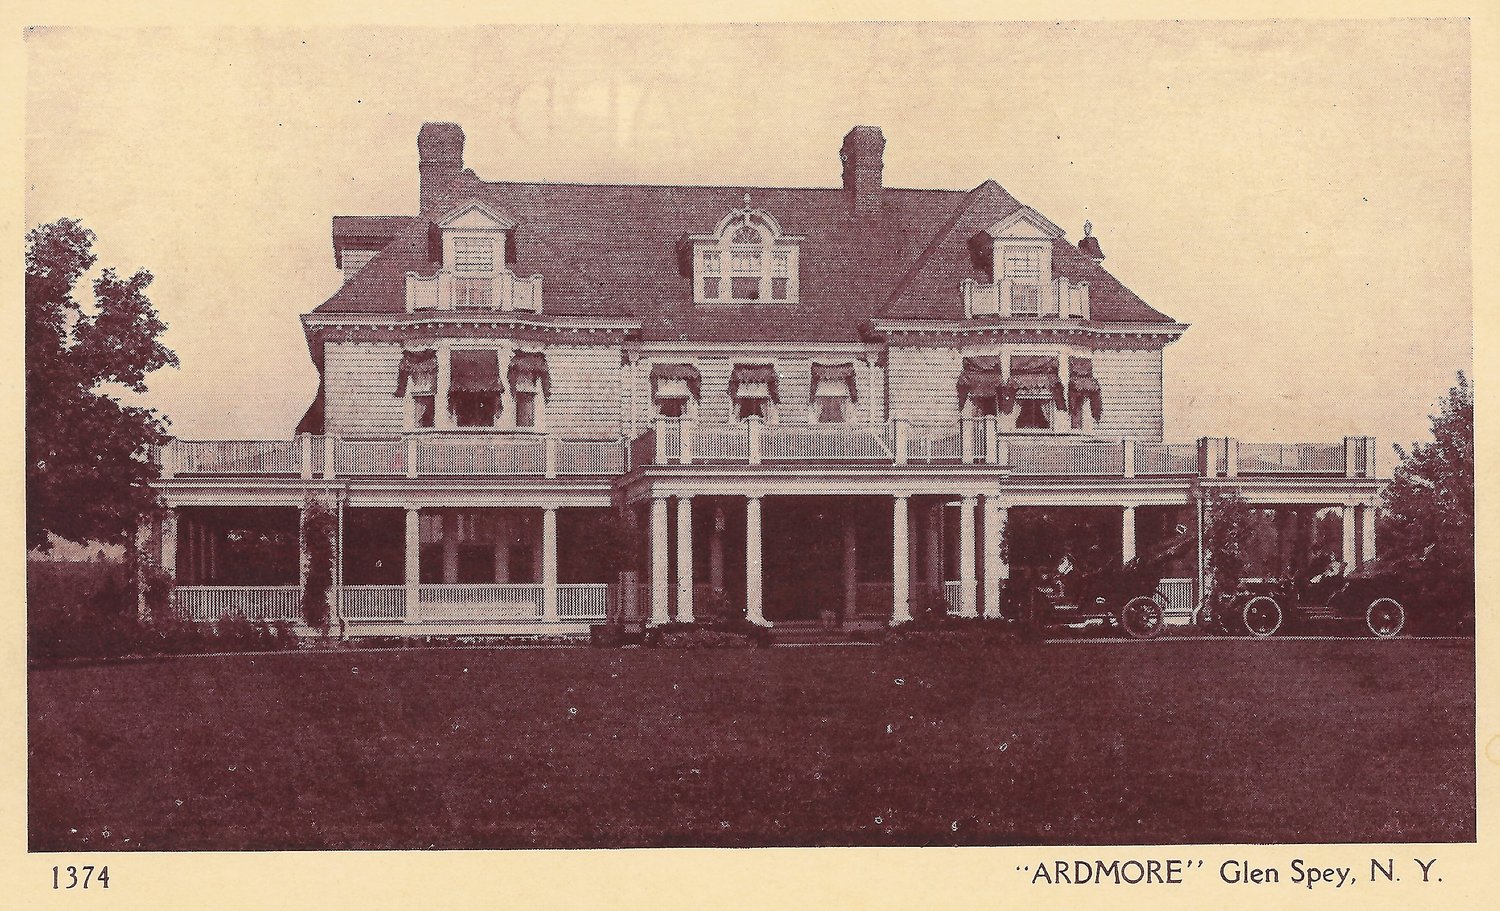 This postcard of the Ardmore in Glen Spey, NY shows the awnings that kept the place cool. You could probably sleep on the second-story porch too, assuming it wasn’t raining.